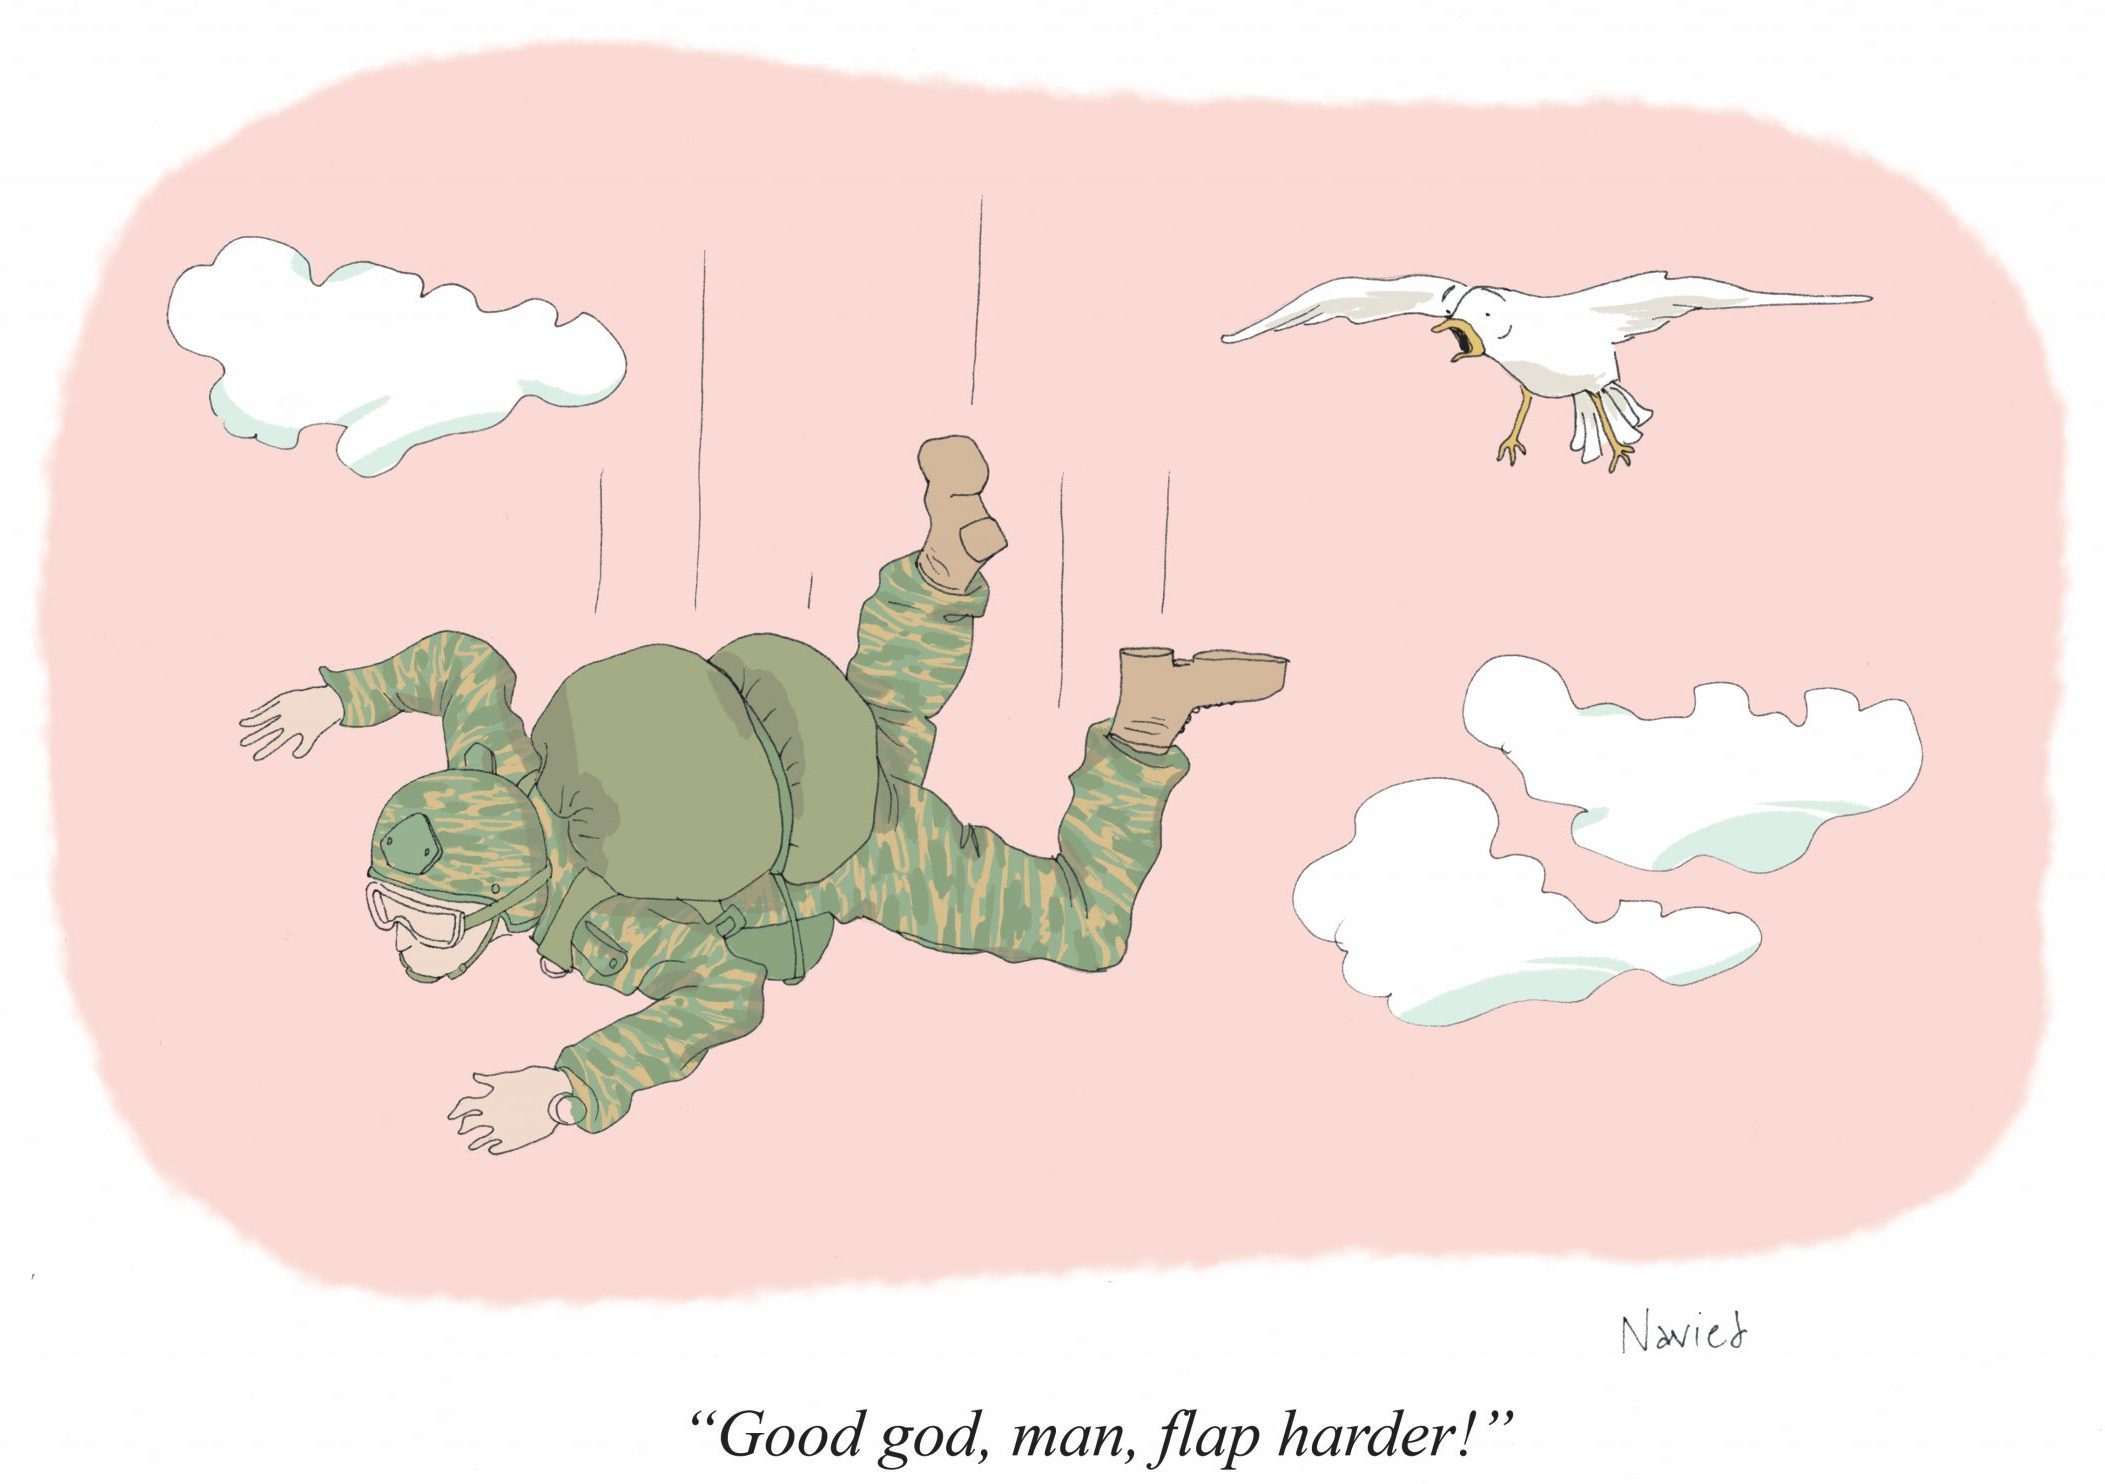 a bird says to a falling man in camouflage, "good god, man, flap harder!"